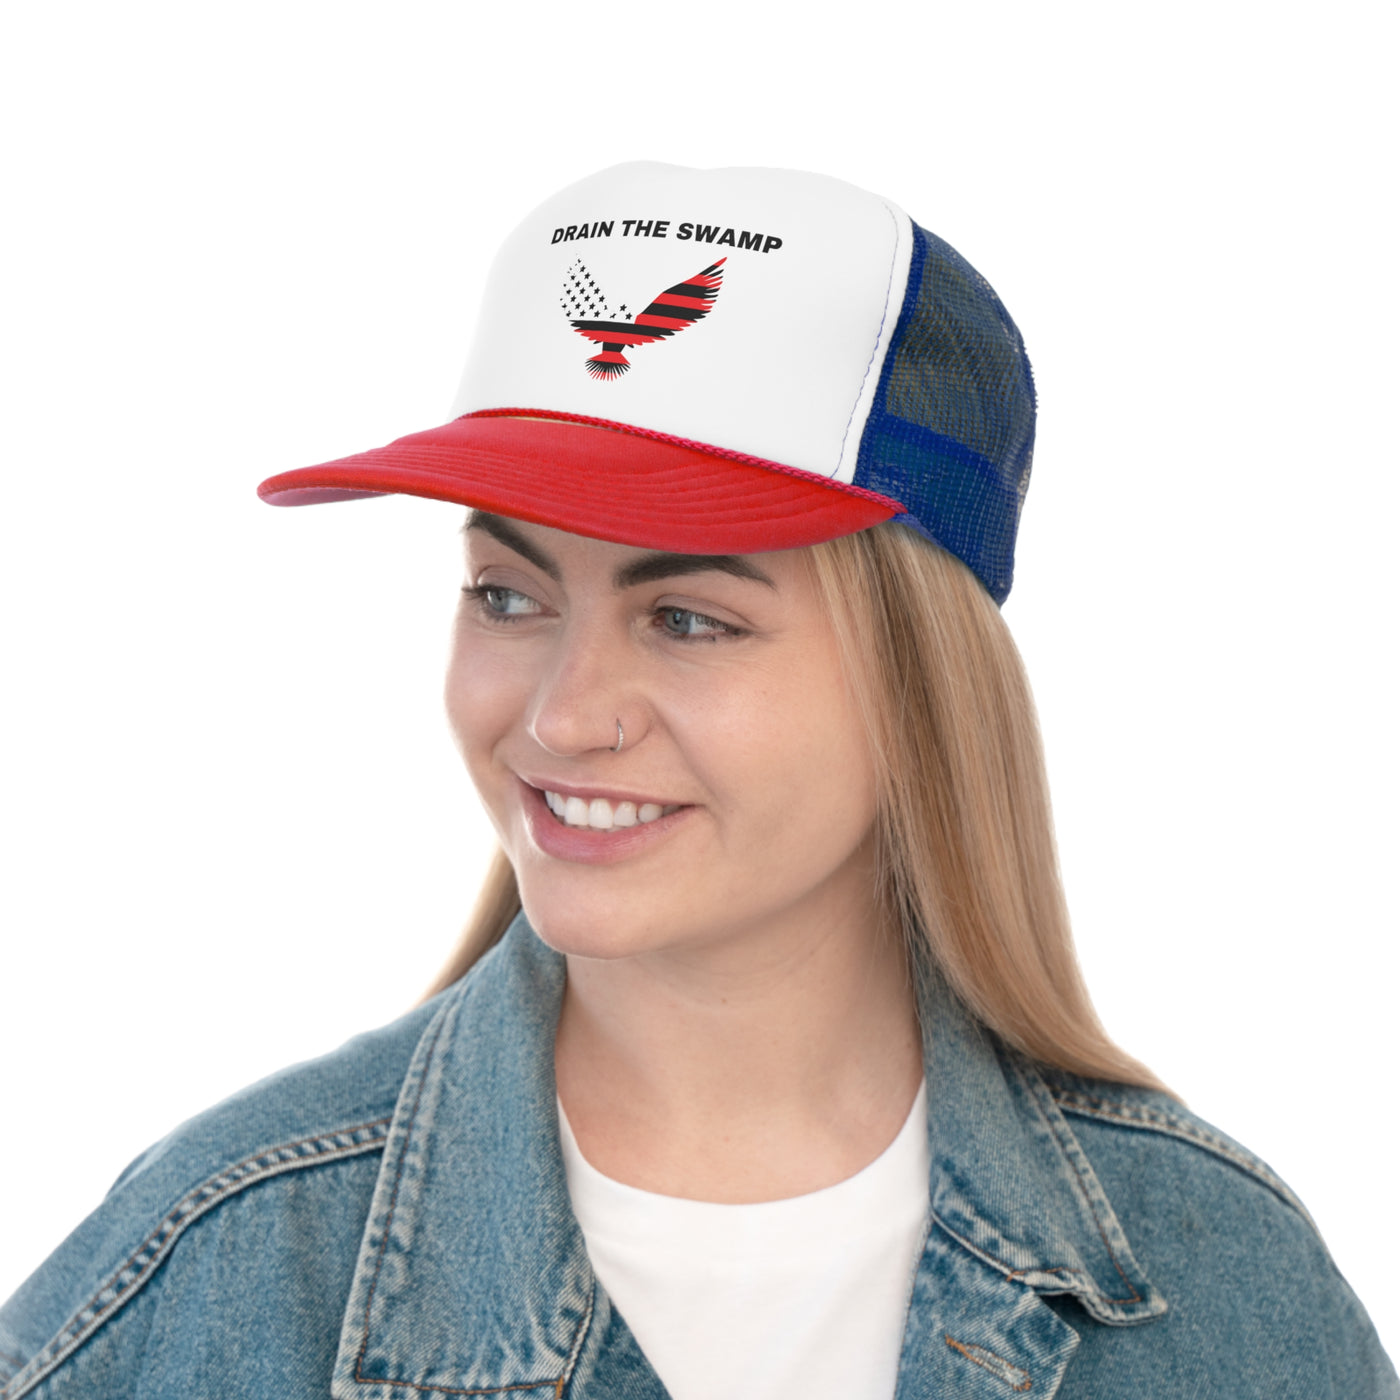 DRAIN THE SWAMP PATRIOTIC HAT - Freedom First Supply